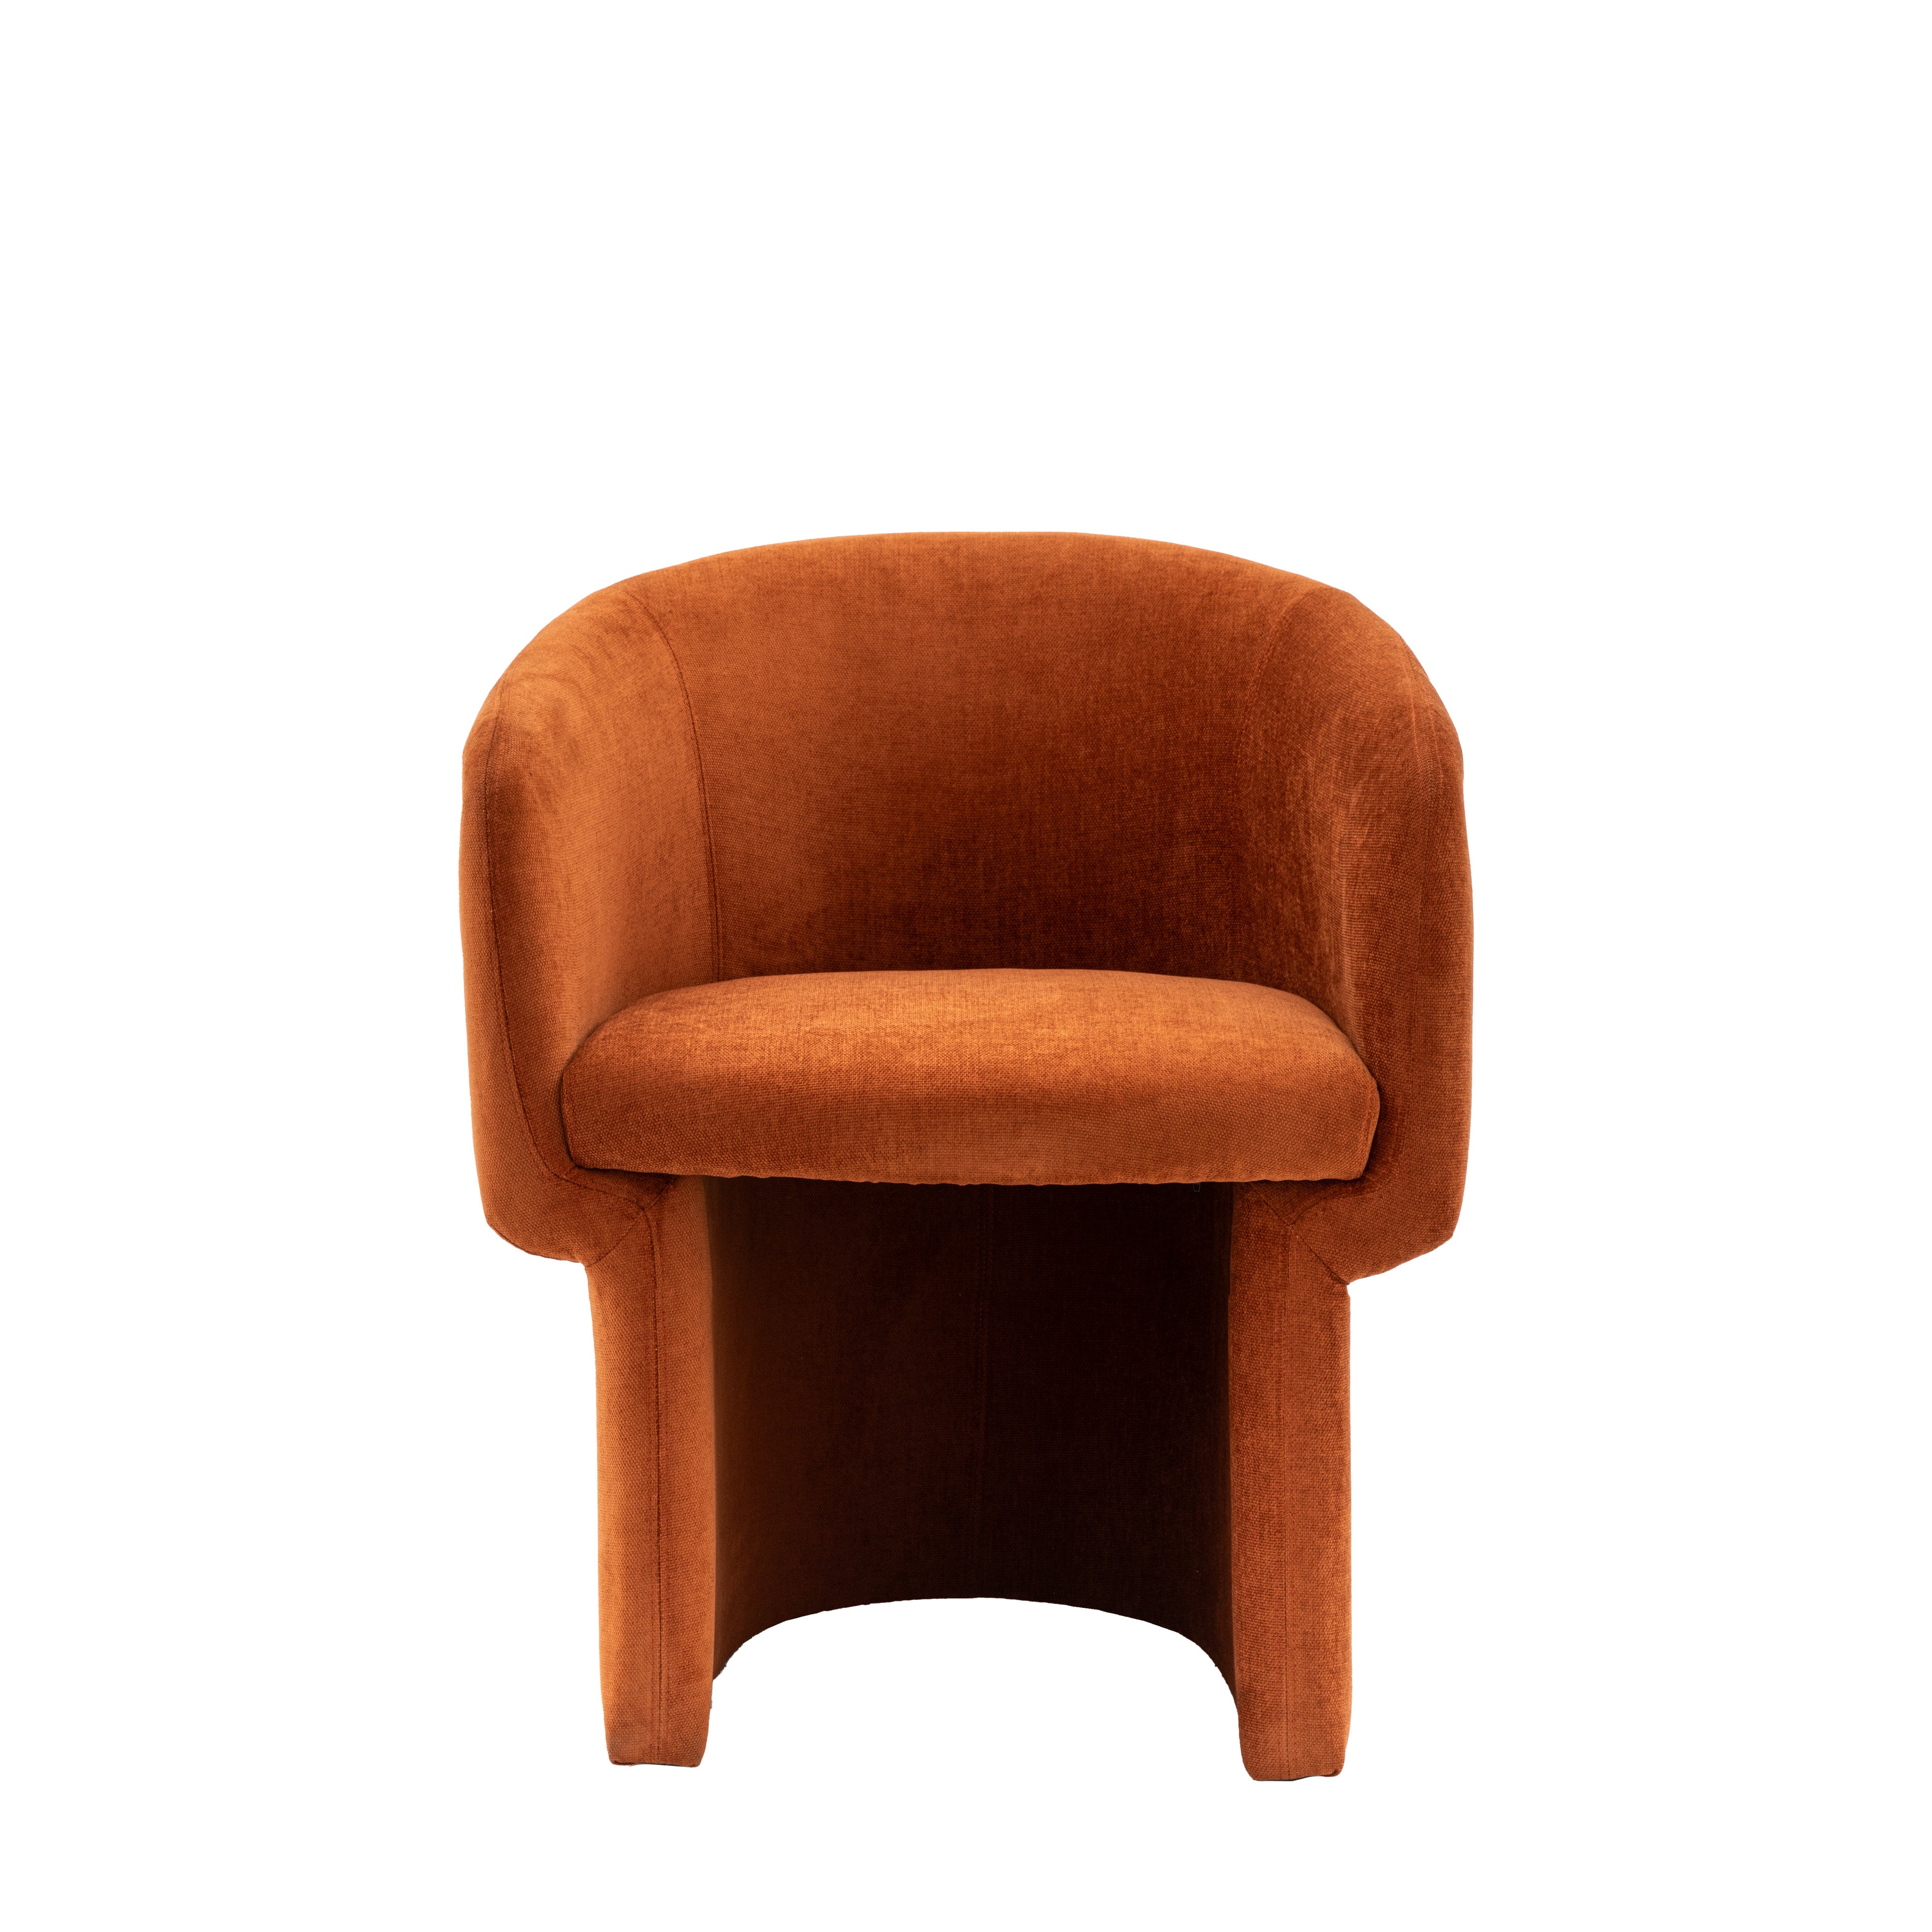 Holm Dining Chair - Rust - hus & co.